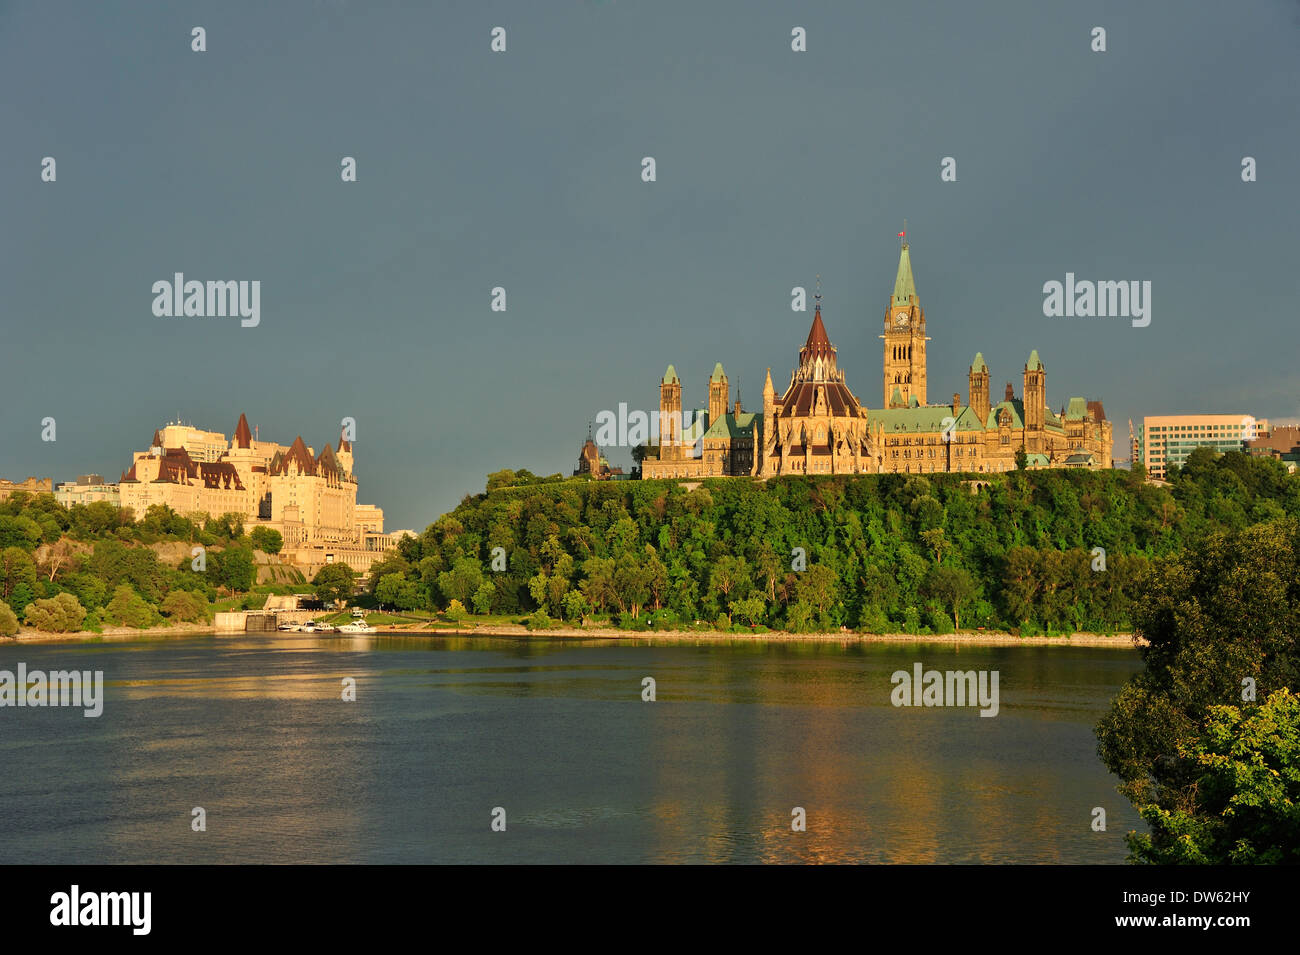 The Canadian parliament buildings, against a stormy sky. The Ottawa River in the foreground. Stock Photo